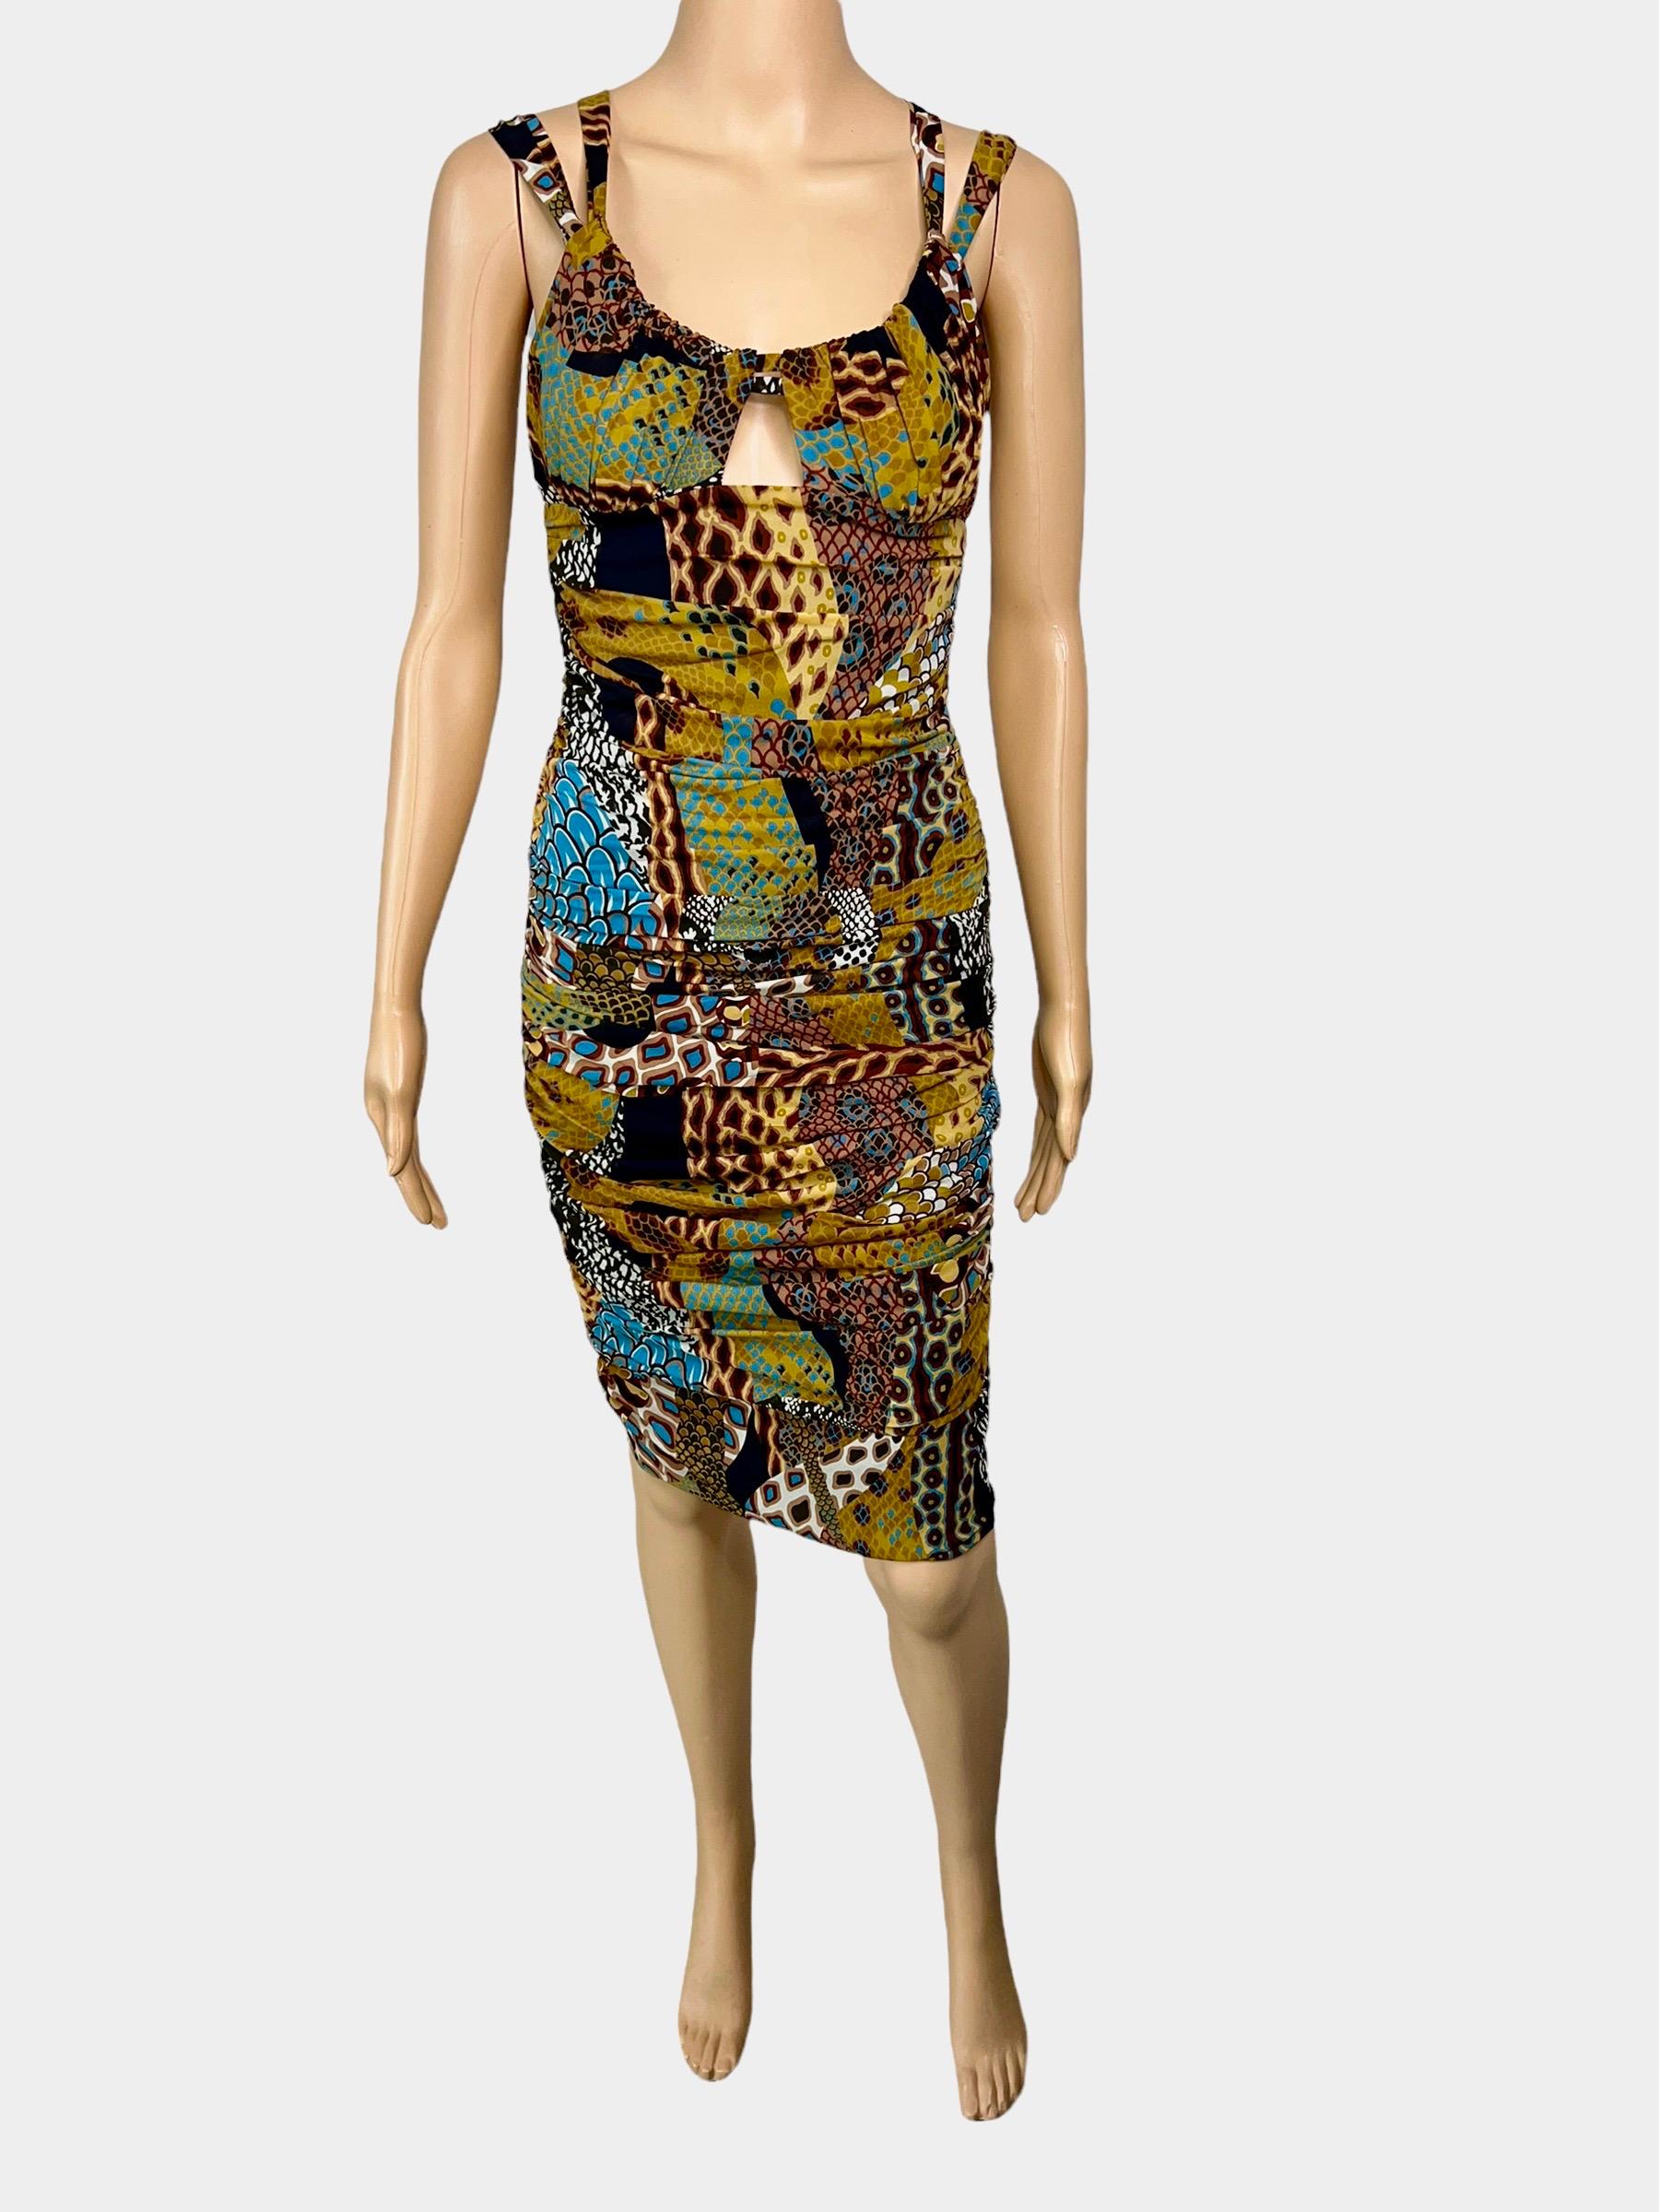 Versace F/W 2005 Runway Plunging Neckline Ruched Animal Print Dress For Sale 2